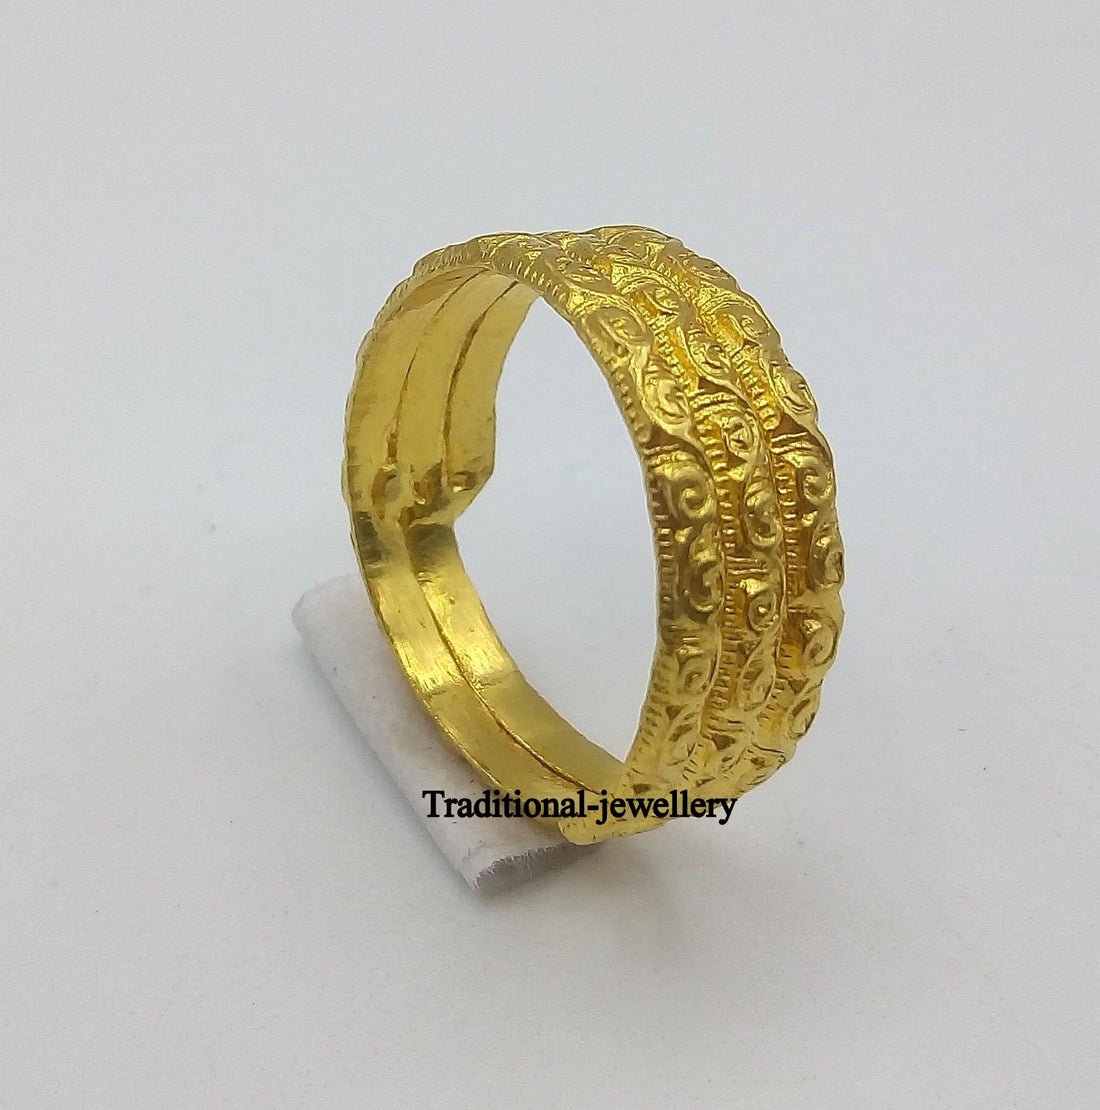 Vintage antique design 22k yellow gold handmade ring band fabulous indian tribal unisex jewelry - TRIBAL ORNAMENTS